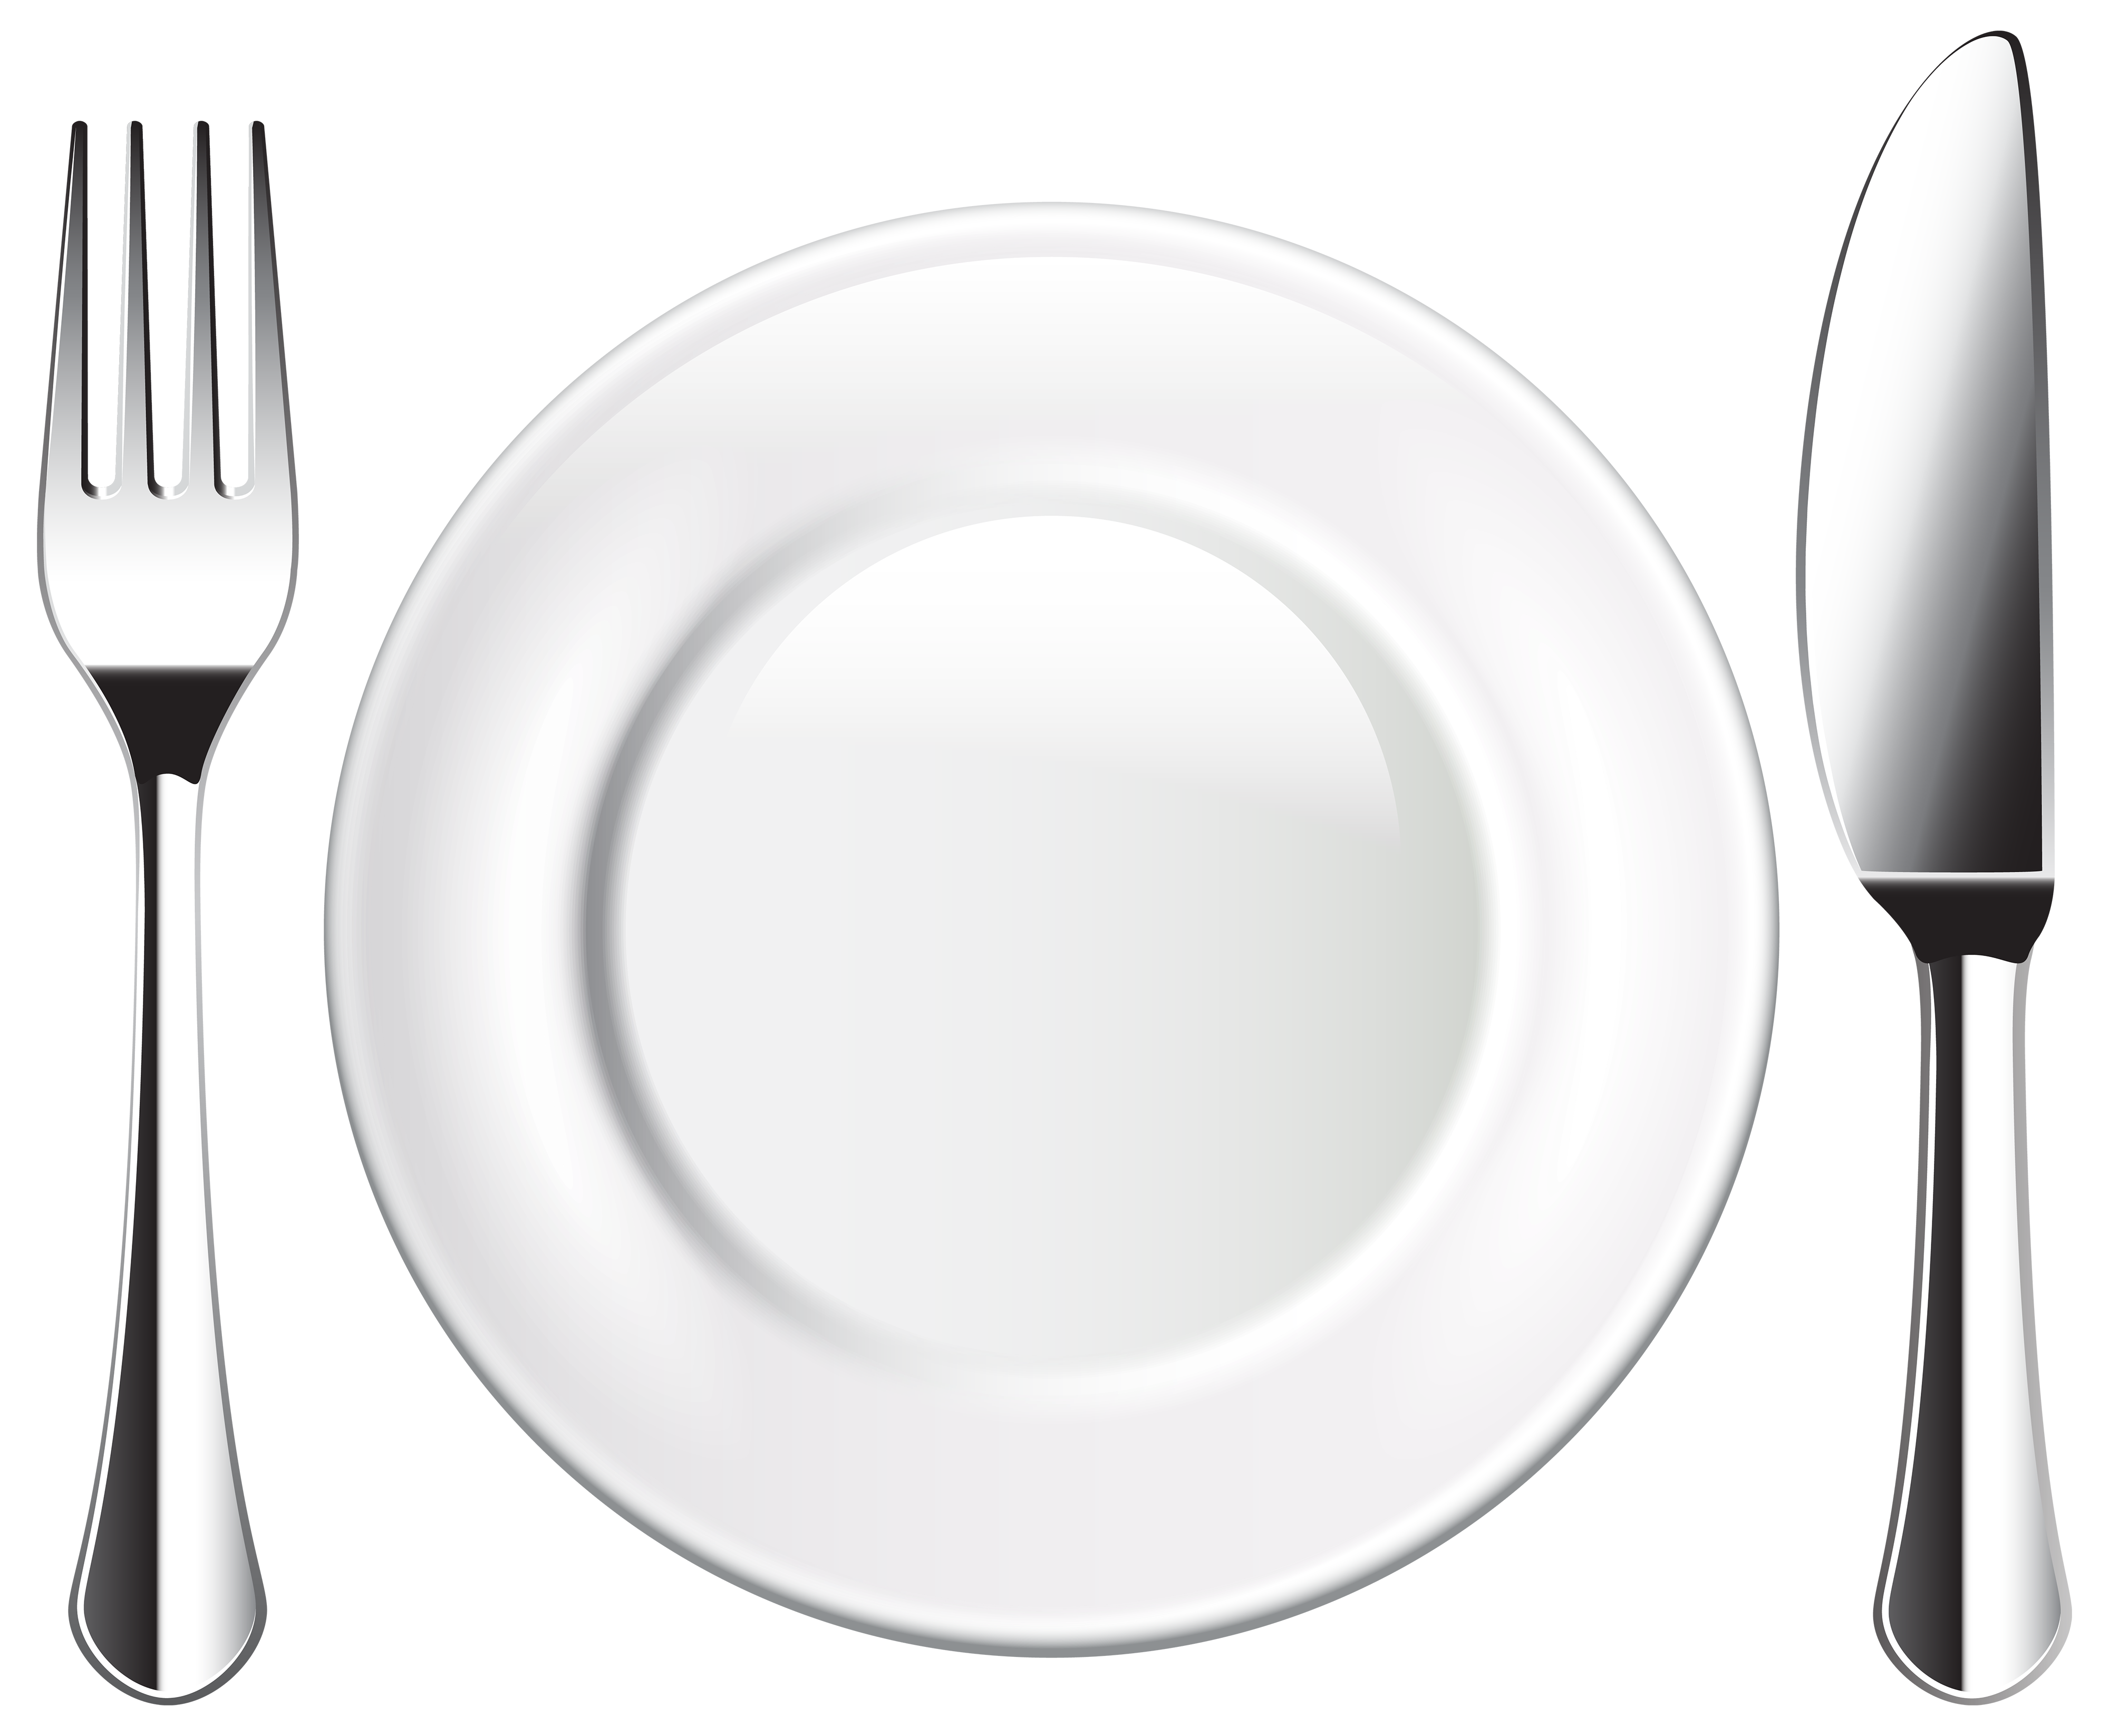 Plate Knife and Fork PNG Clipart.